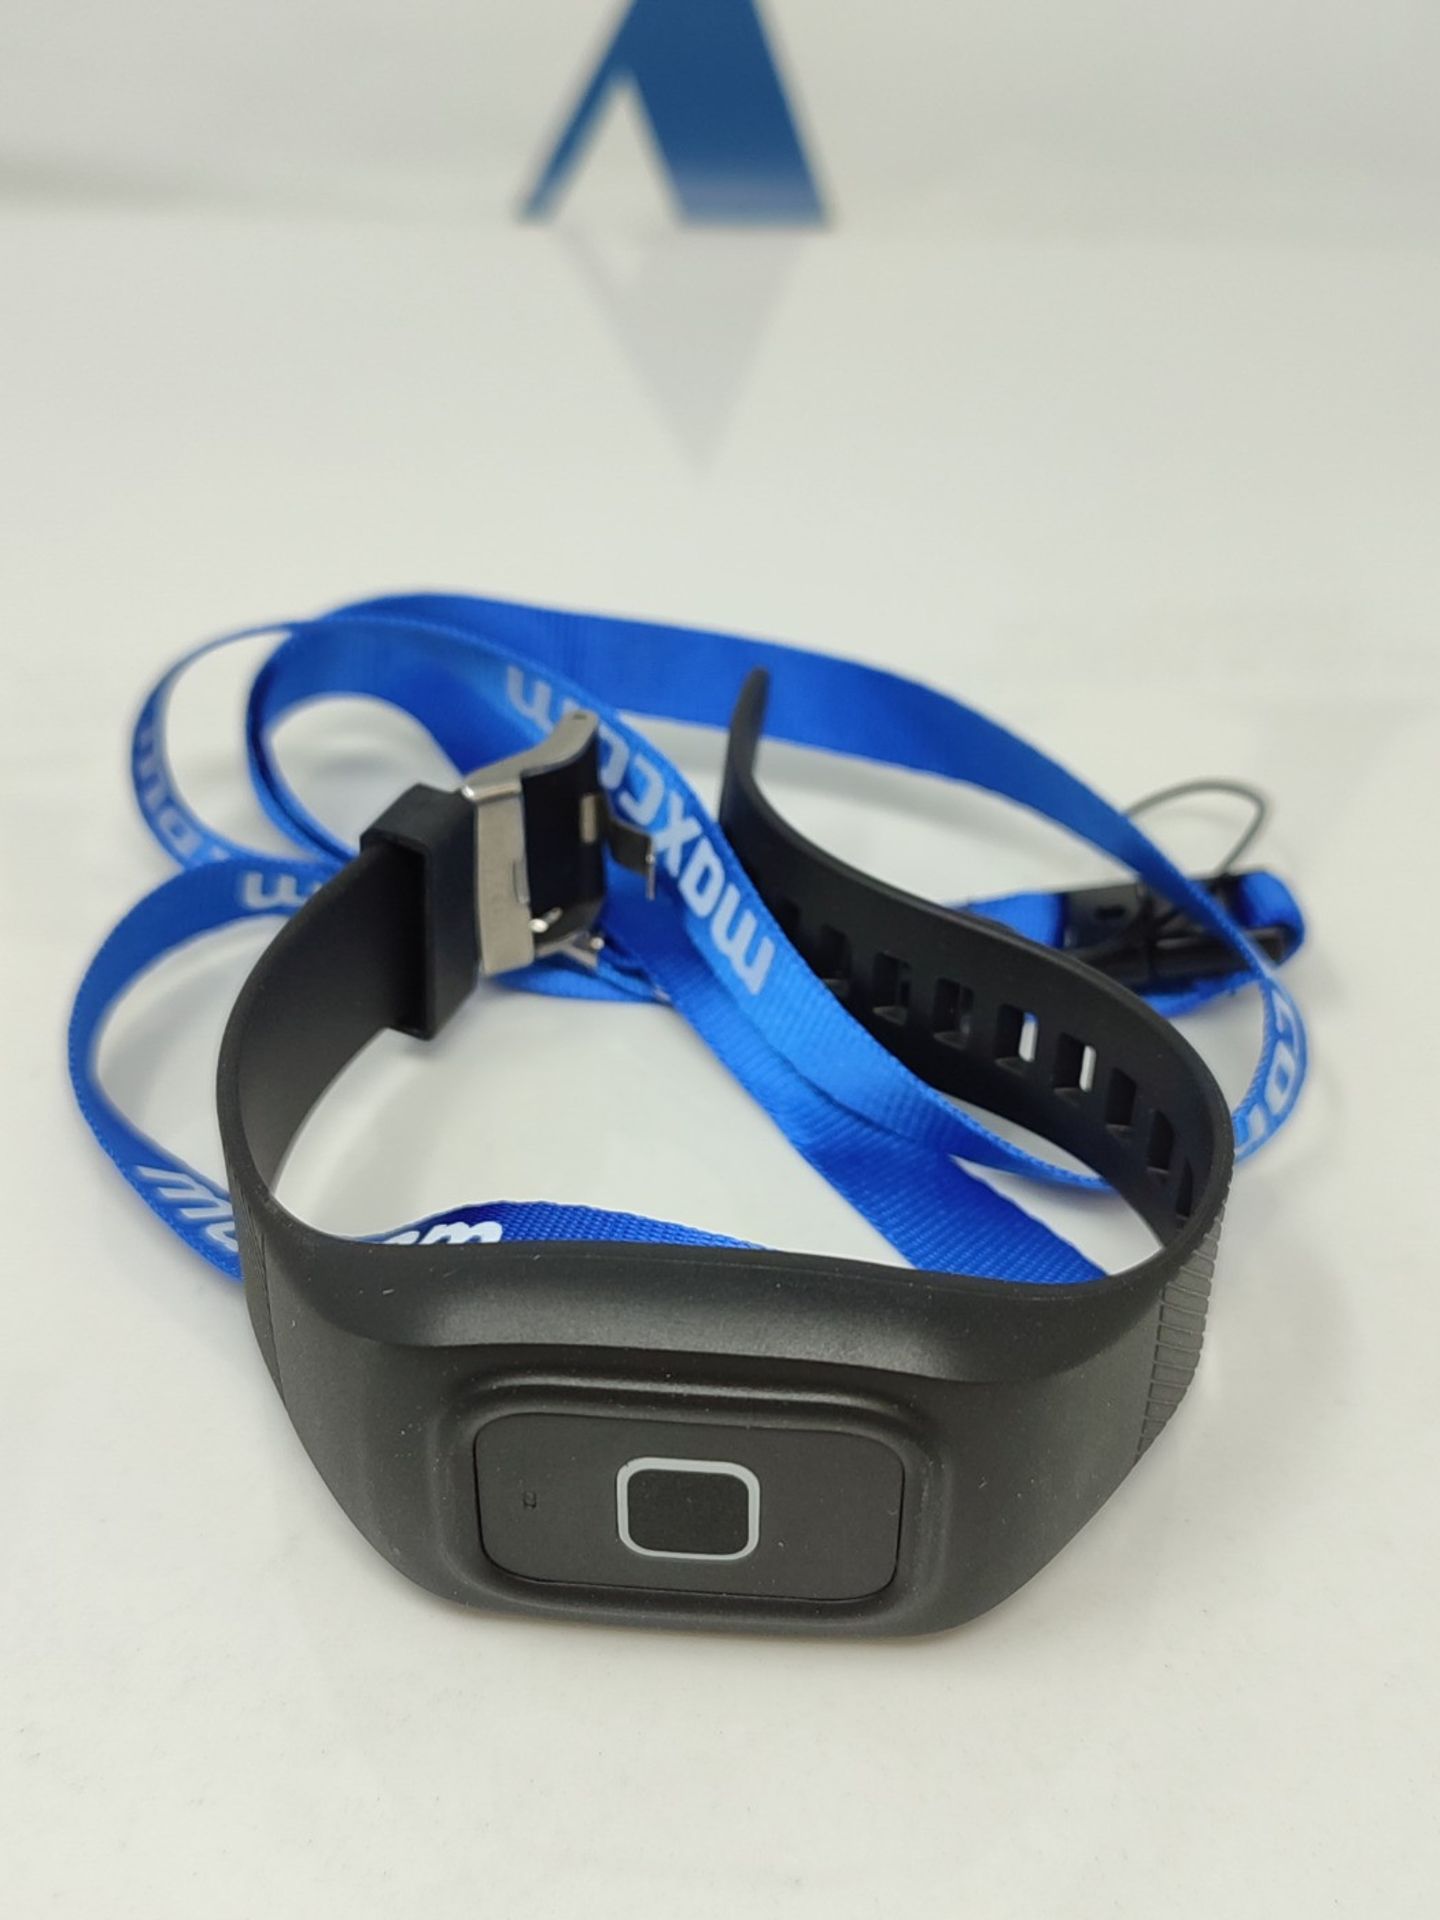 Maxcom FW735 - Emergency call bracelet for seniors, adults, with SOS emergency button, - Image 2 of 2